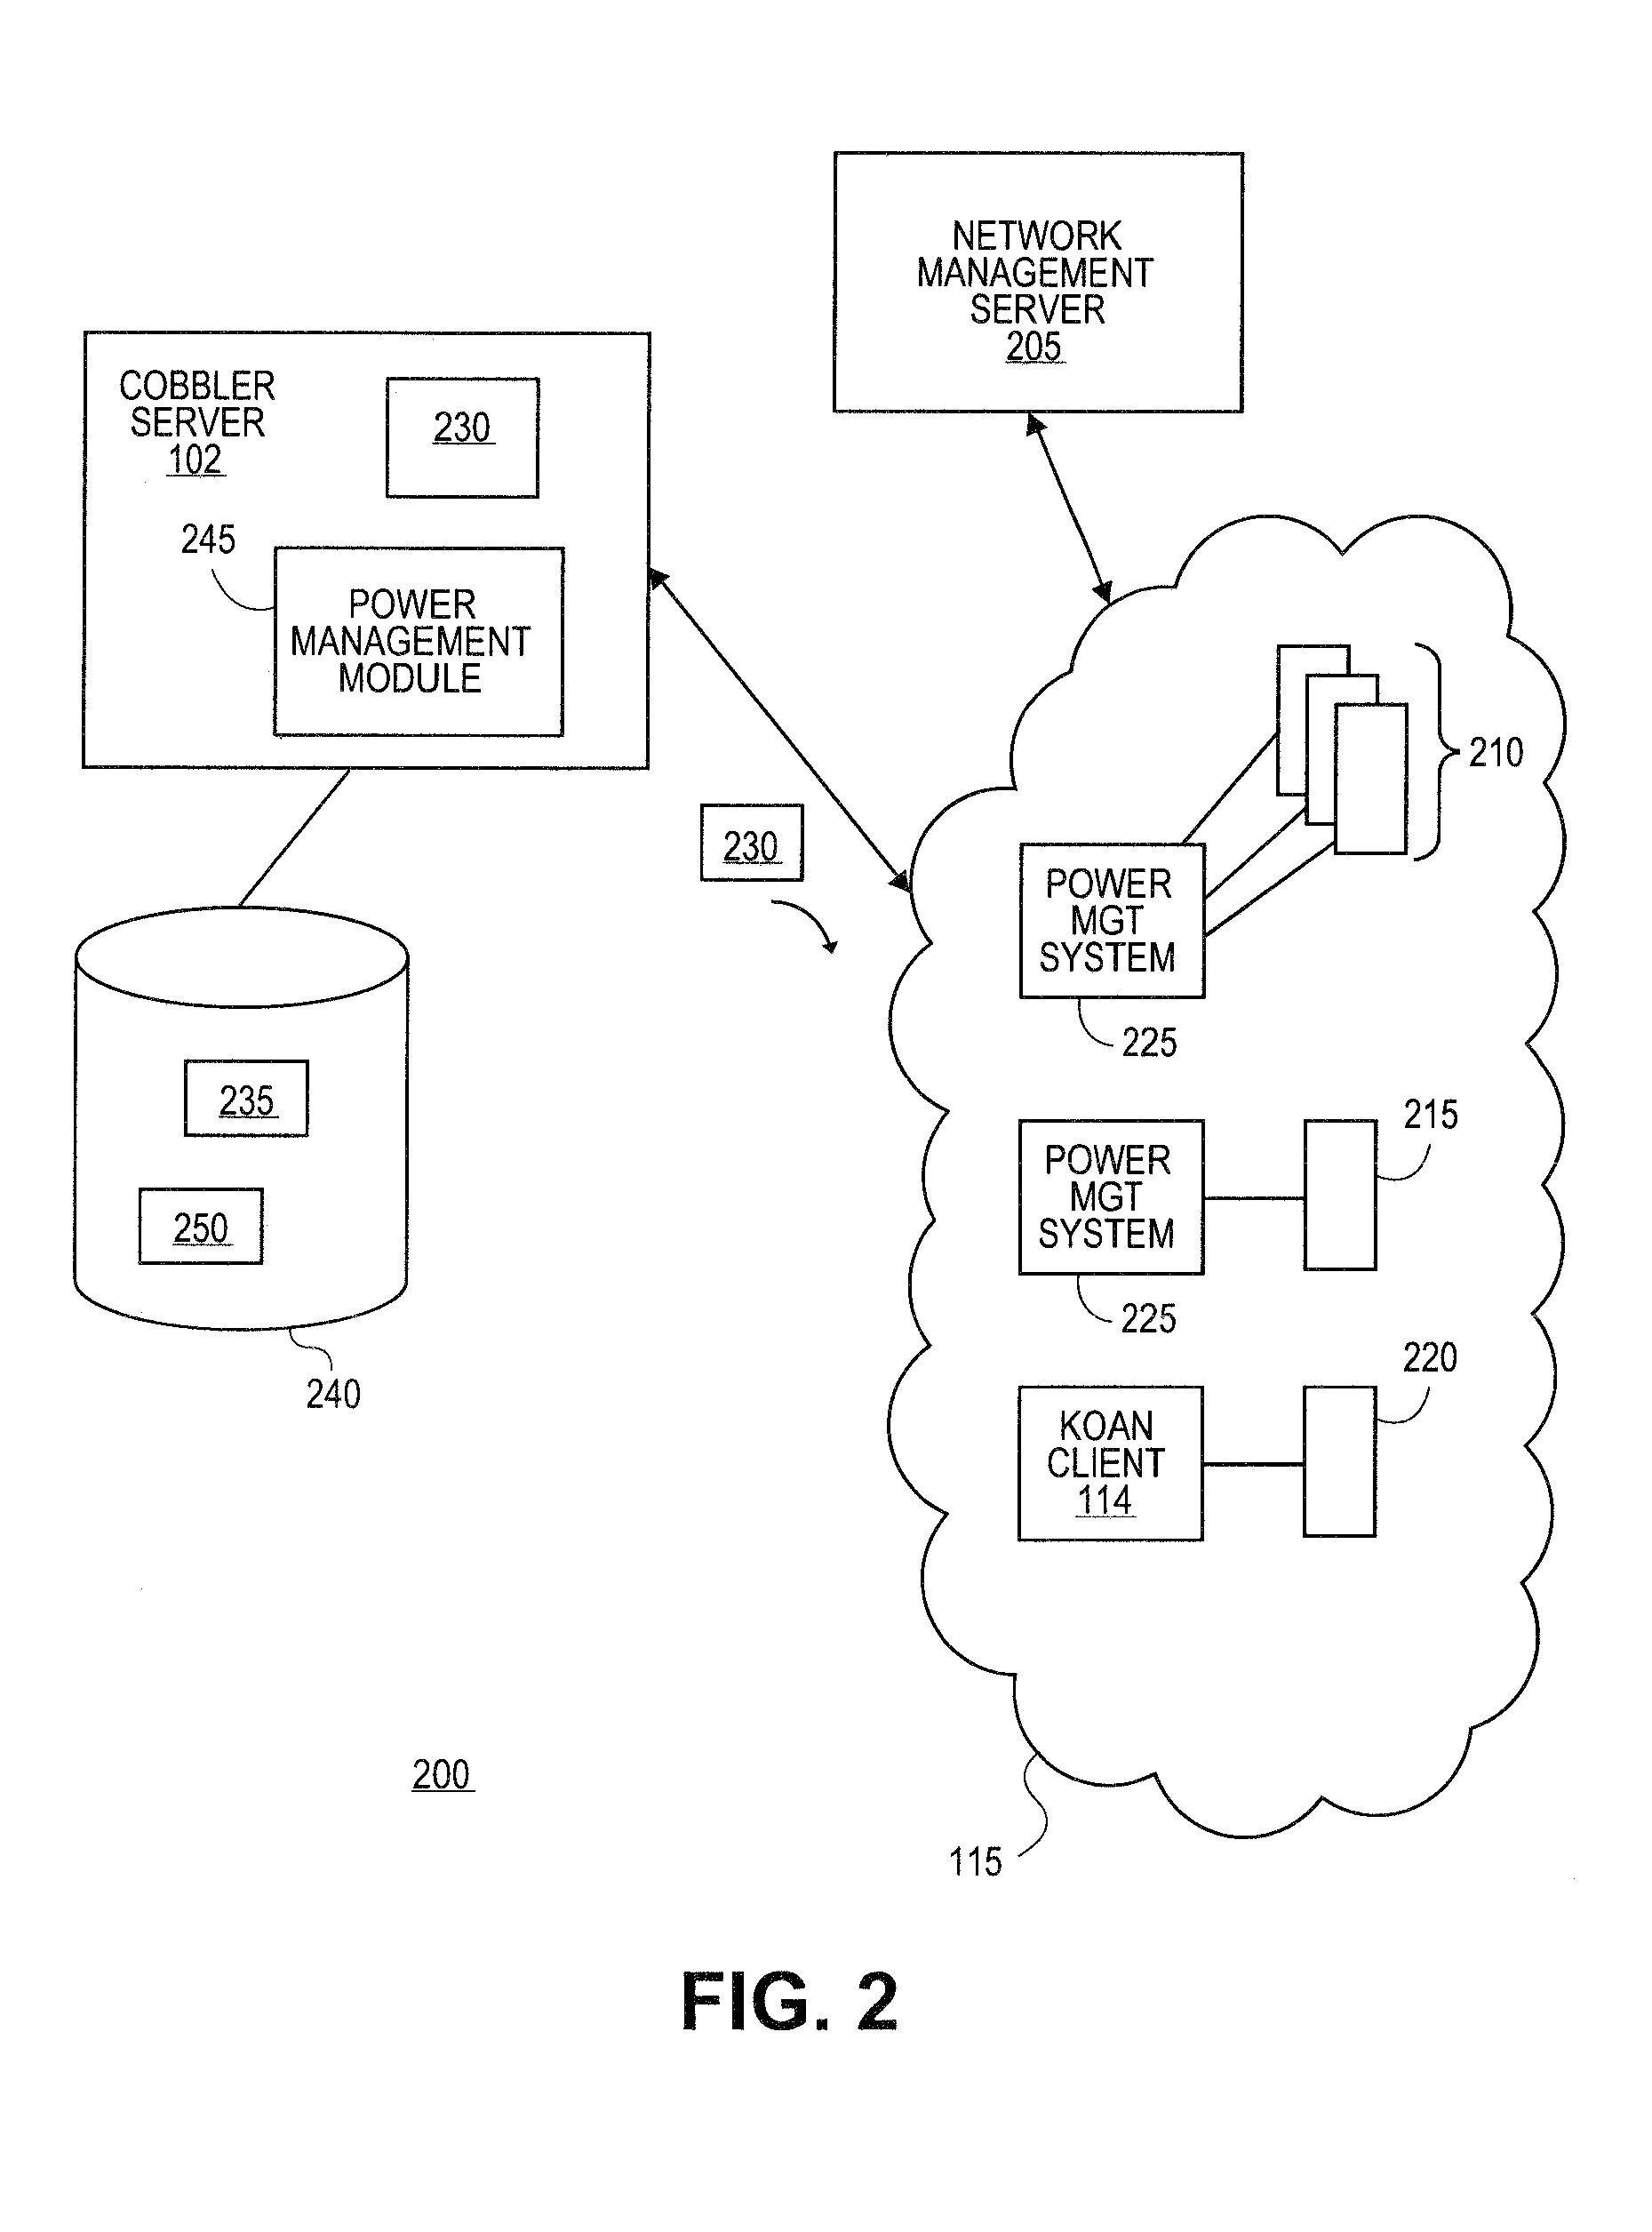 Systems and methods for cloning target machines in a software provisioning environment